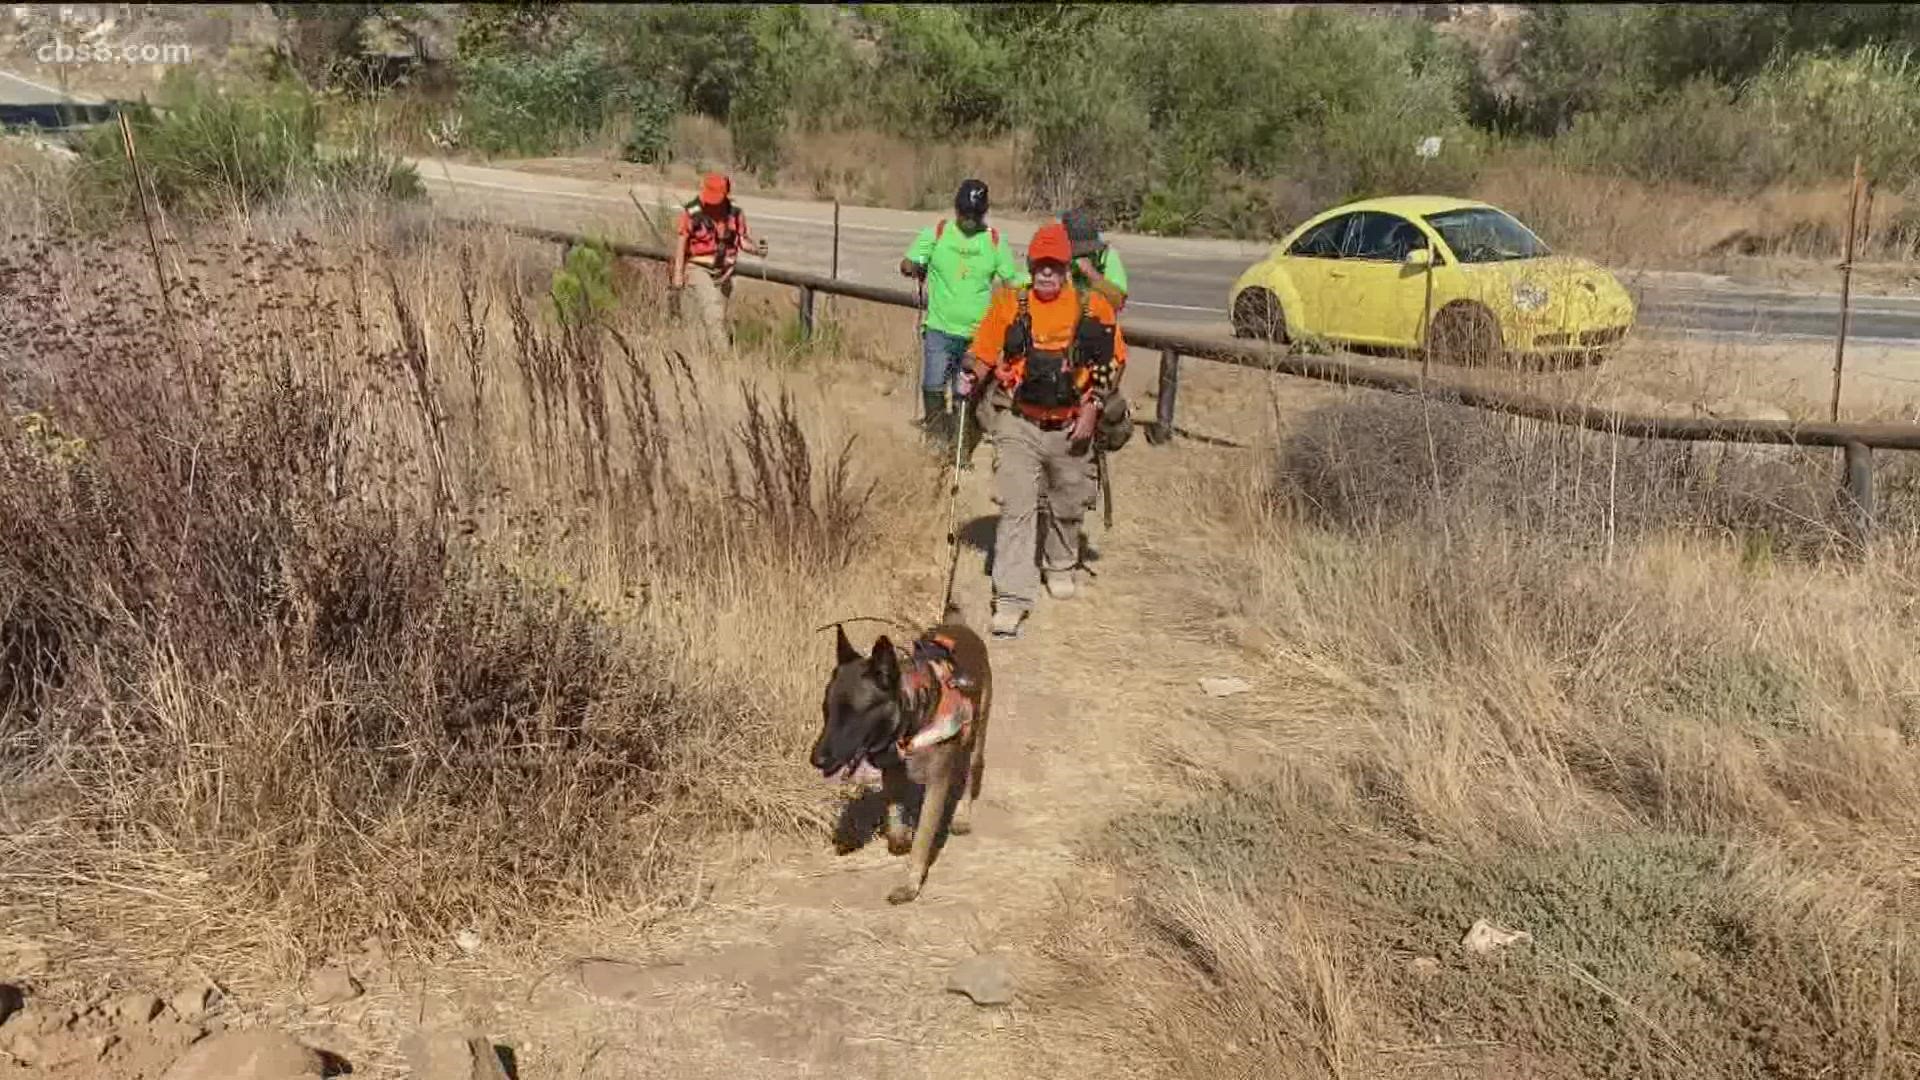 This was the first time Team Maya has used canines to search for remains of the missing mother.